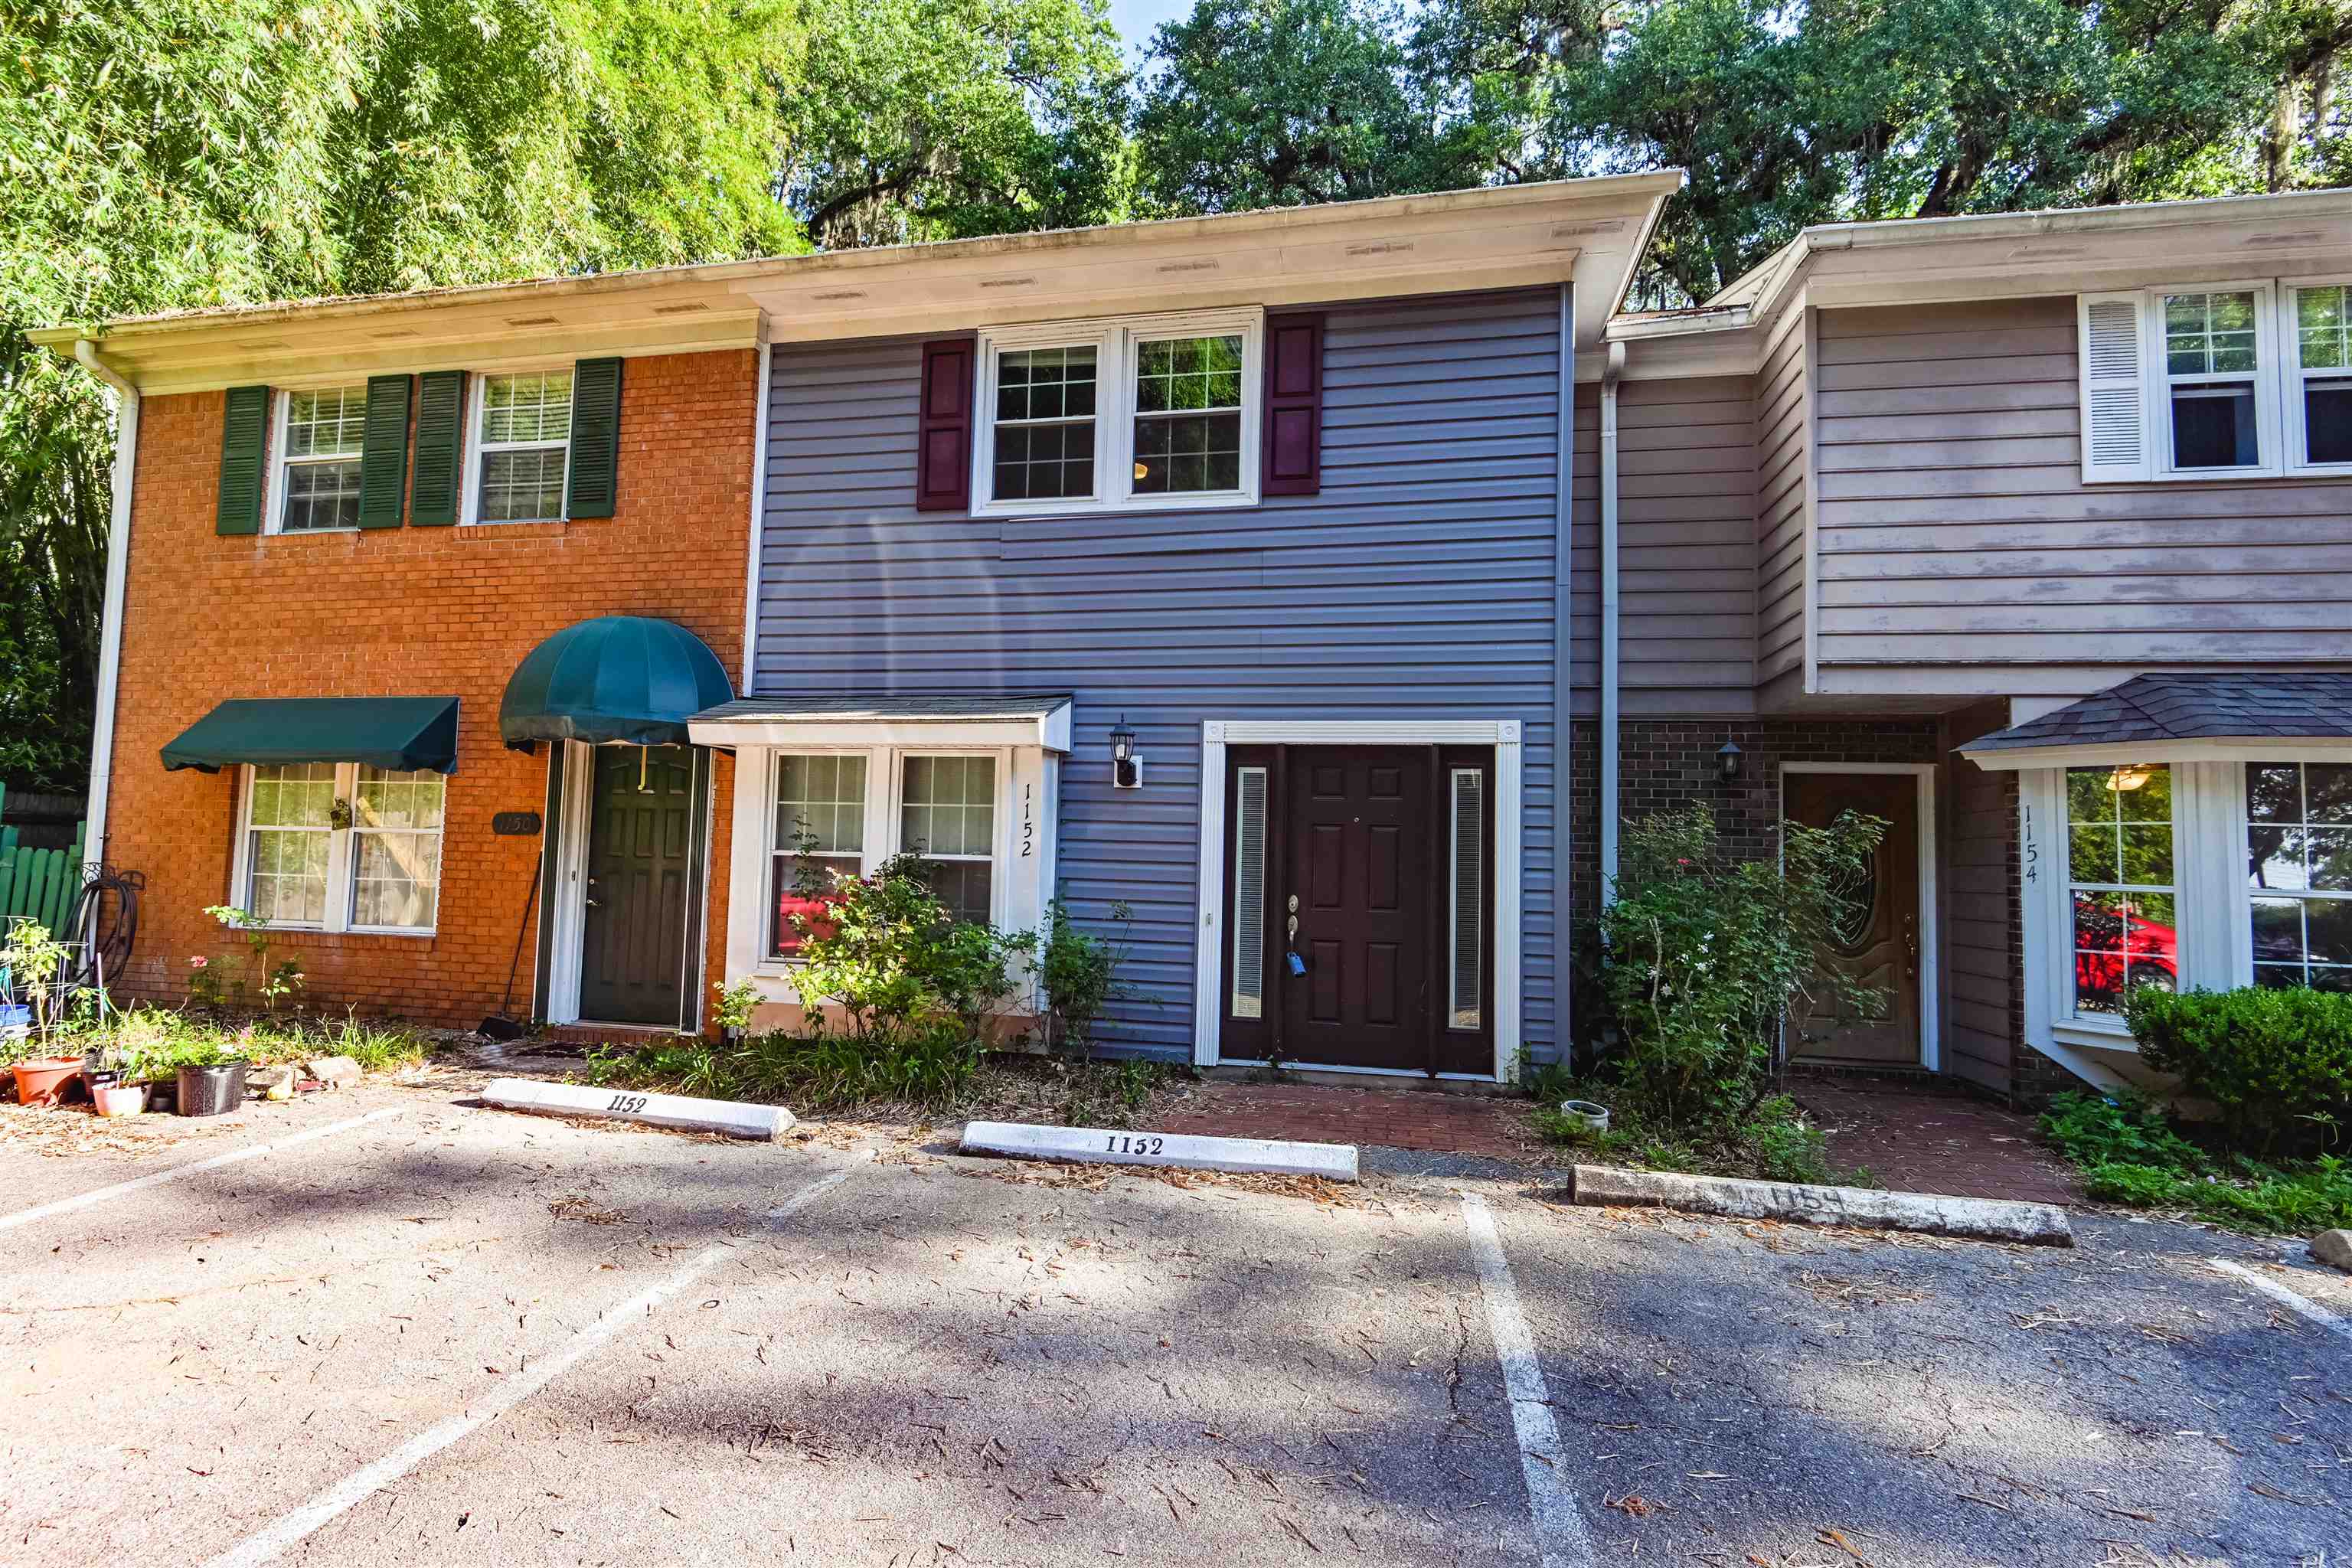 This stylish townhouse is ready for new owners! This awesome home is located right off of Magnolia Drive in north central Tallahassee, just minutes from all the shopping, food, and amenities you can think of! Close to the Governors Square Marketplace and mall, just 1 mile from midtown! This is a prime location and a great home with 2 beds and 2.5 baths! There is no HOA, it was removed before 2005.